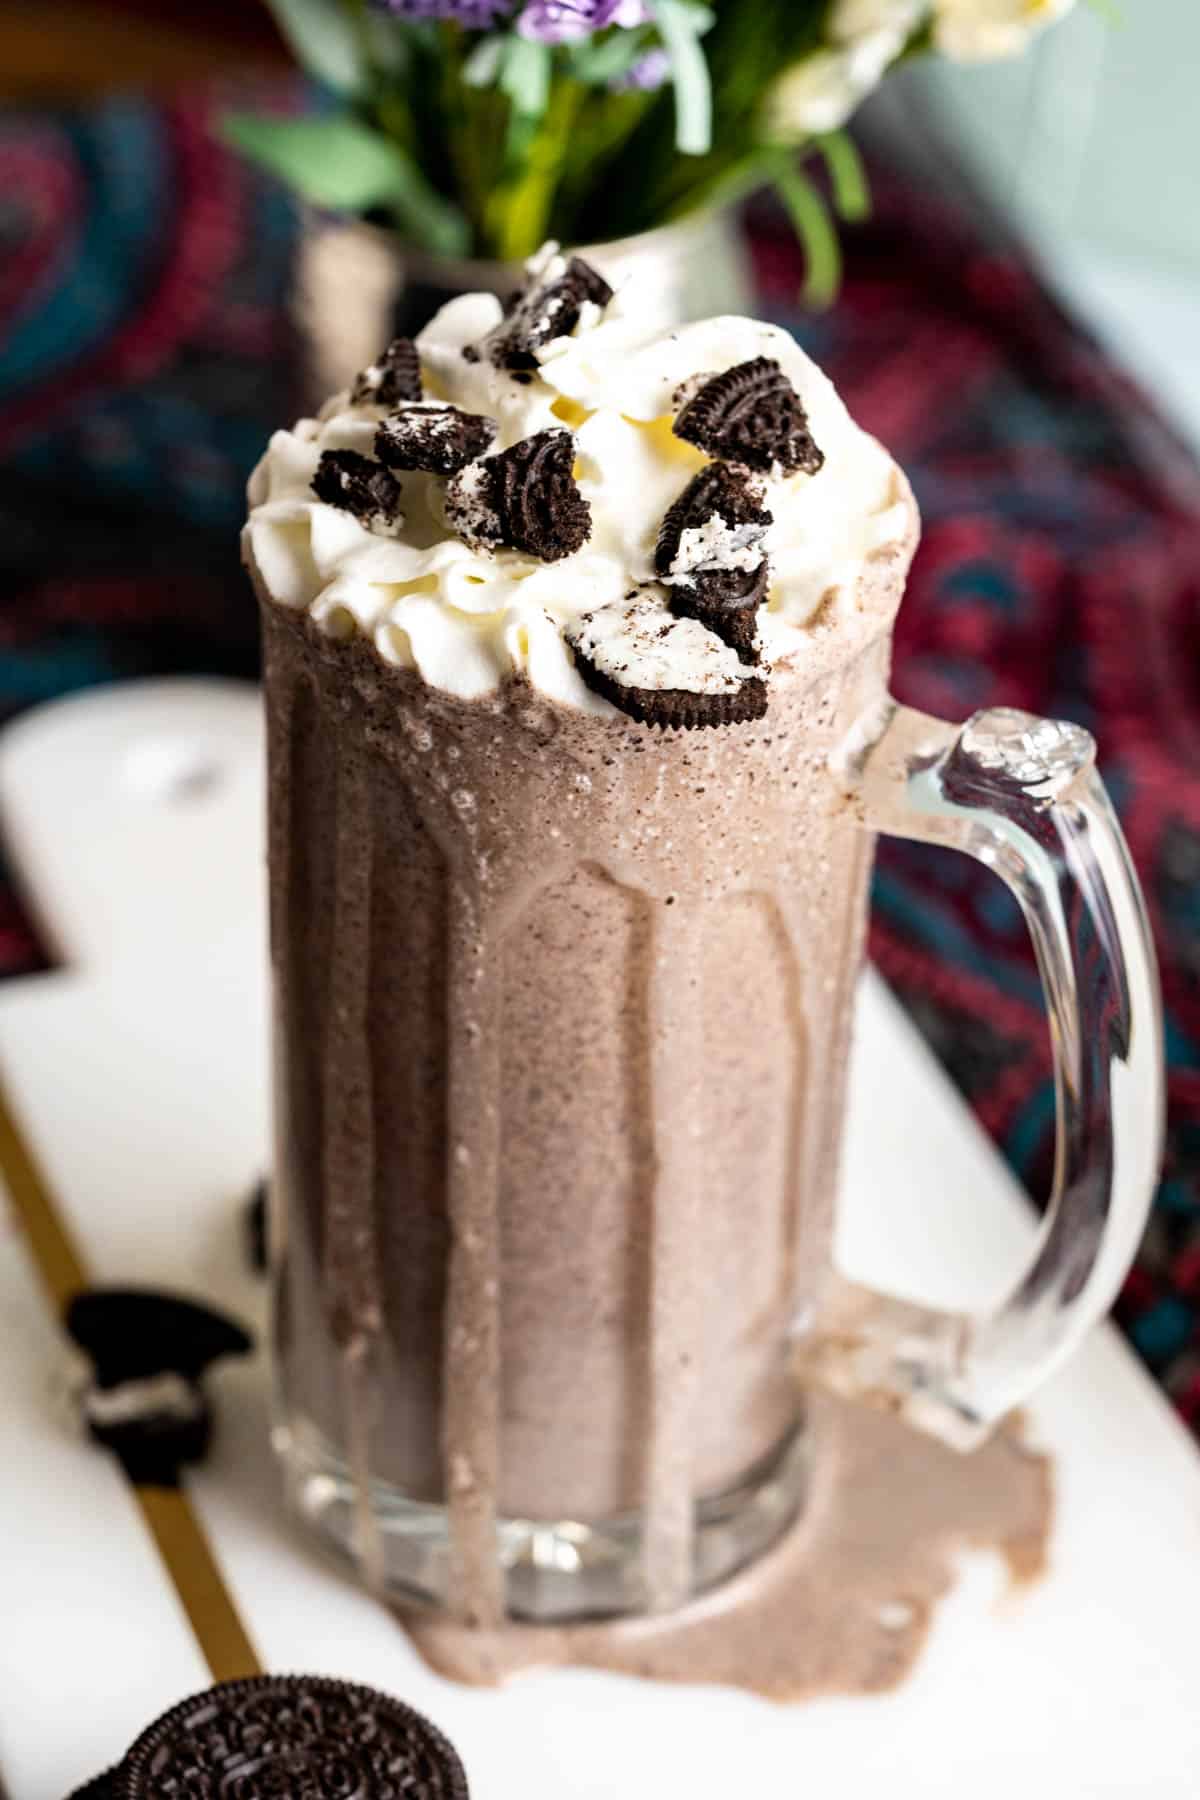 Oreo milkshake in a glass with dollop of whipped cream and crushed Oreos.